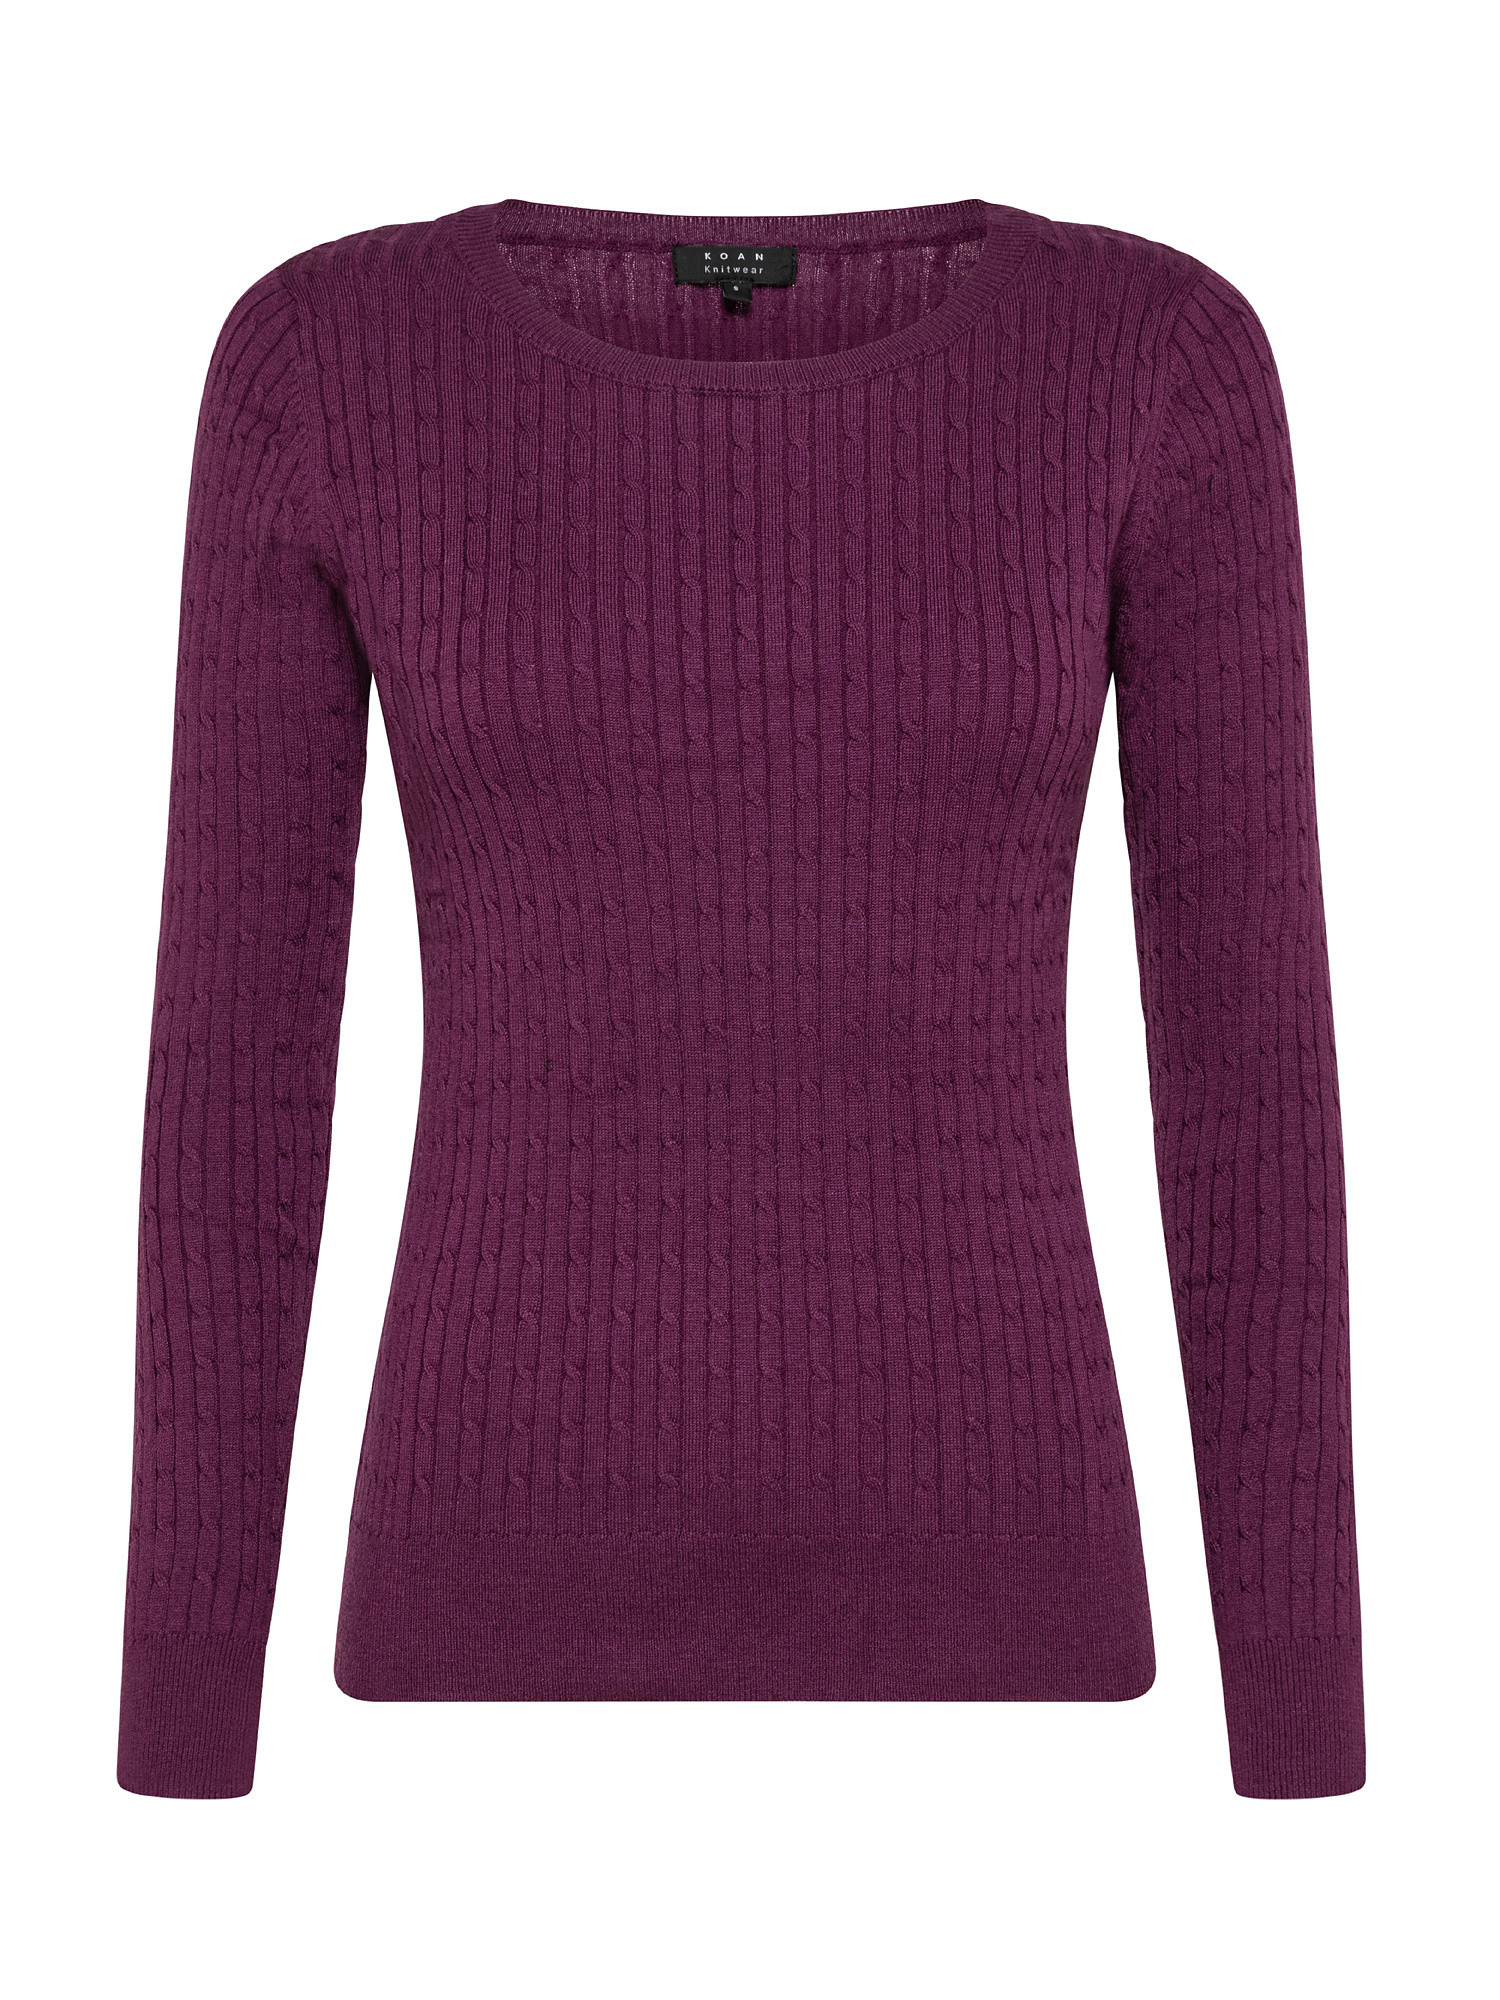 Pullover girocollo in maglia, Viola, large image number 0